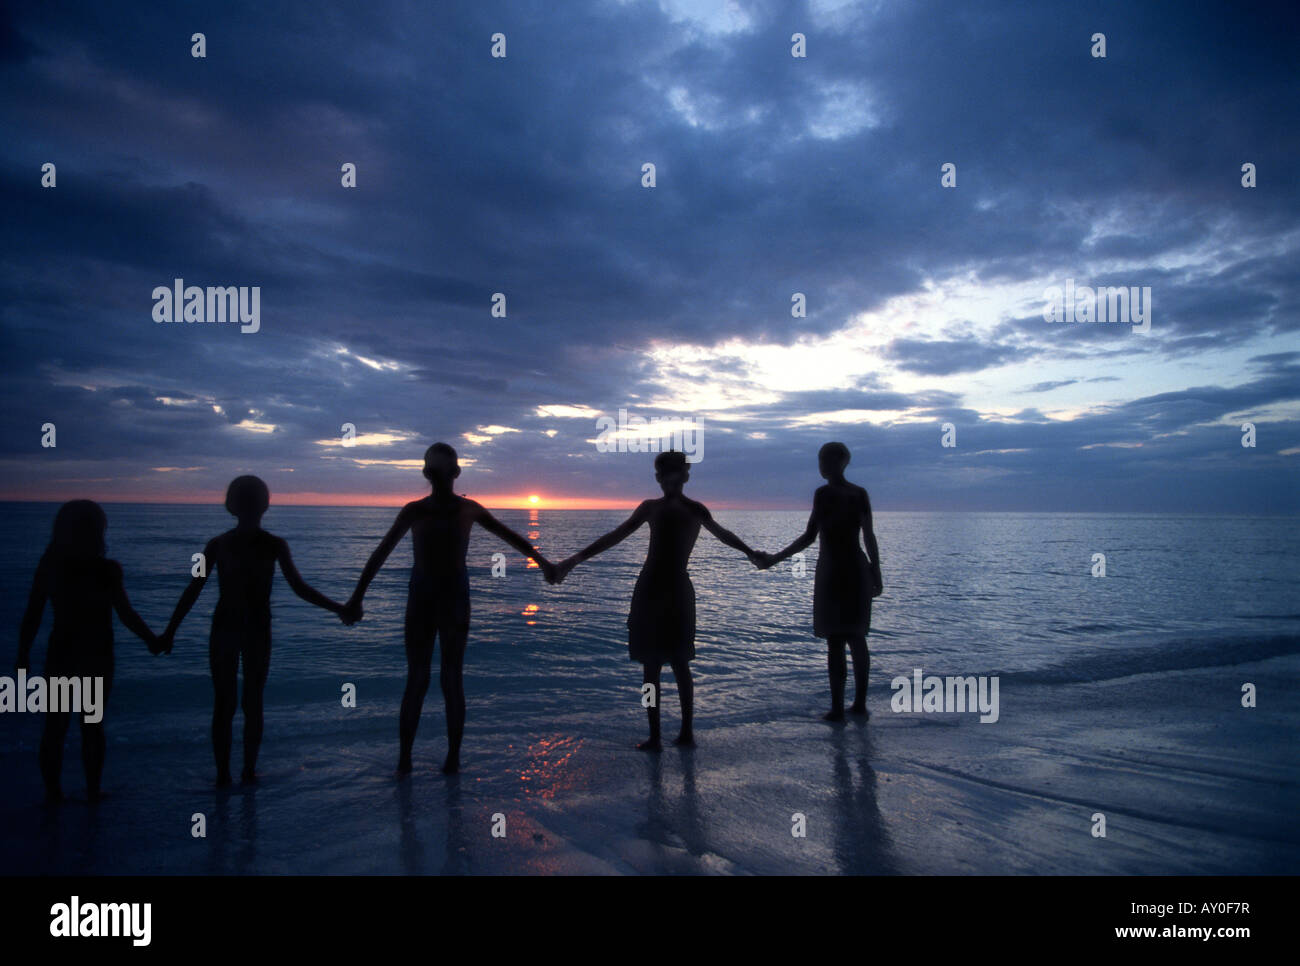 Children with outstretched arms holding hands at sunset silhouette Stock Photo